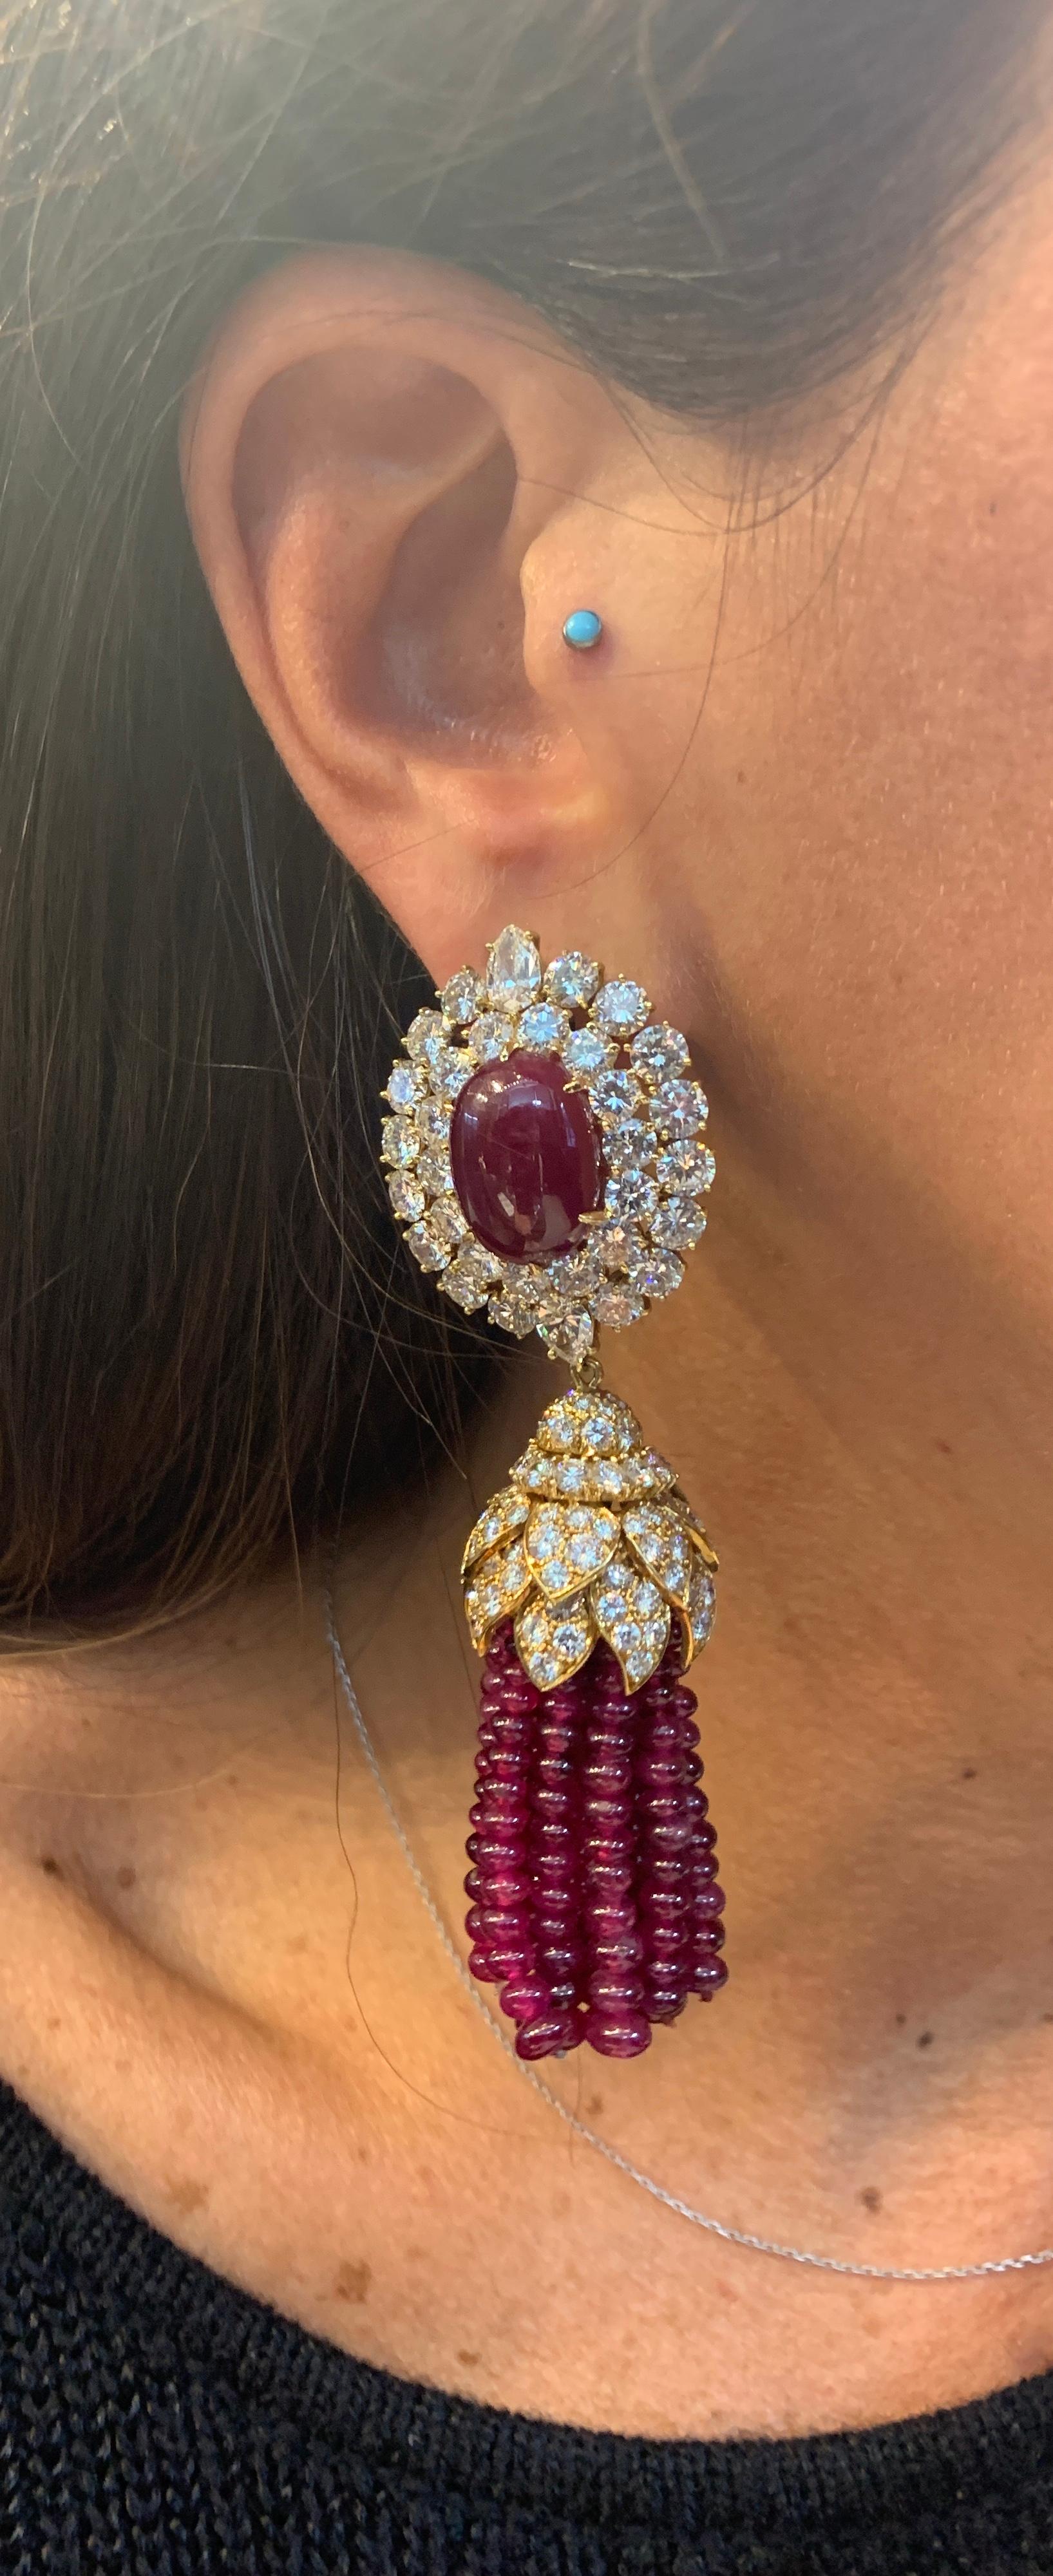 Magnificent Van Cleef & Arpels Day and Night Tassel Earrings

Cabochon rubies, ruby beads and diamonds

Detachable tassels. Both top and bottoms are all signed and numbered

